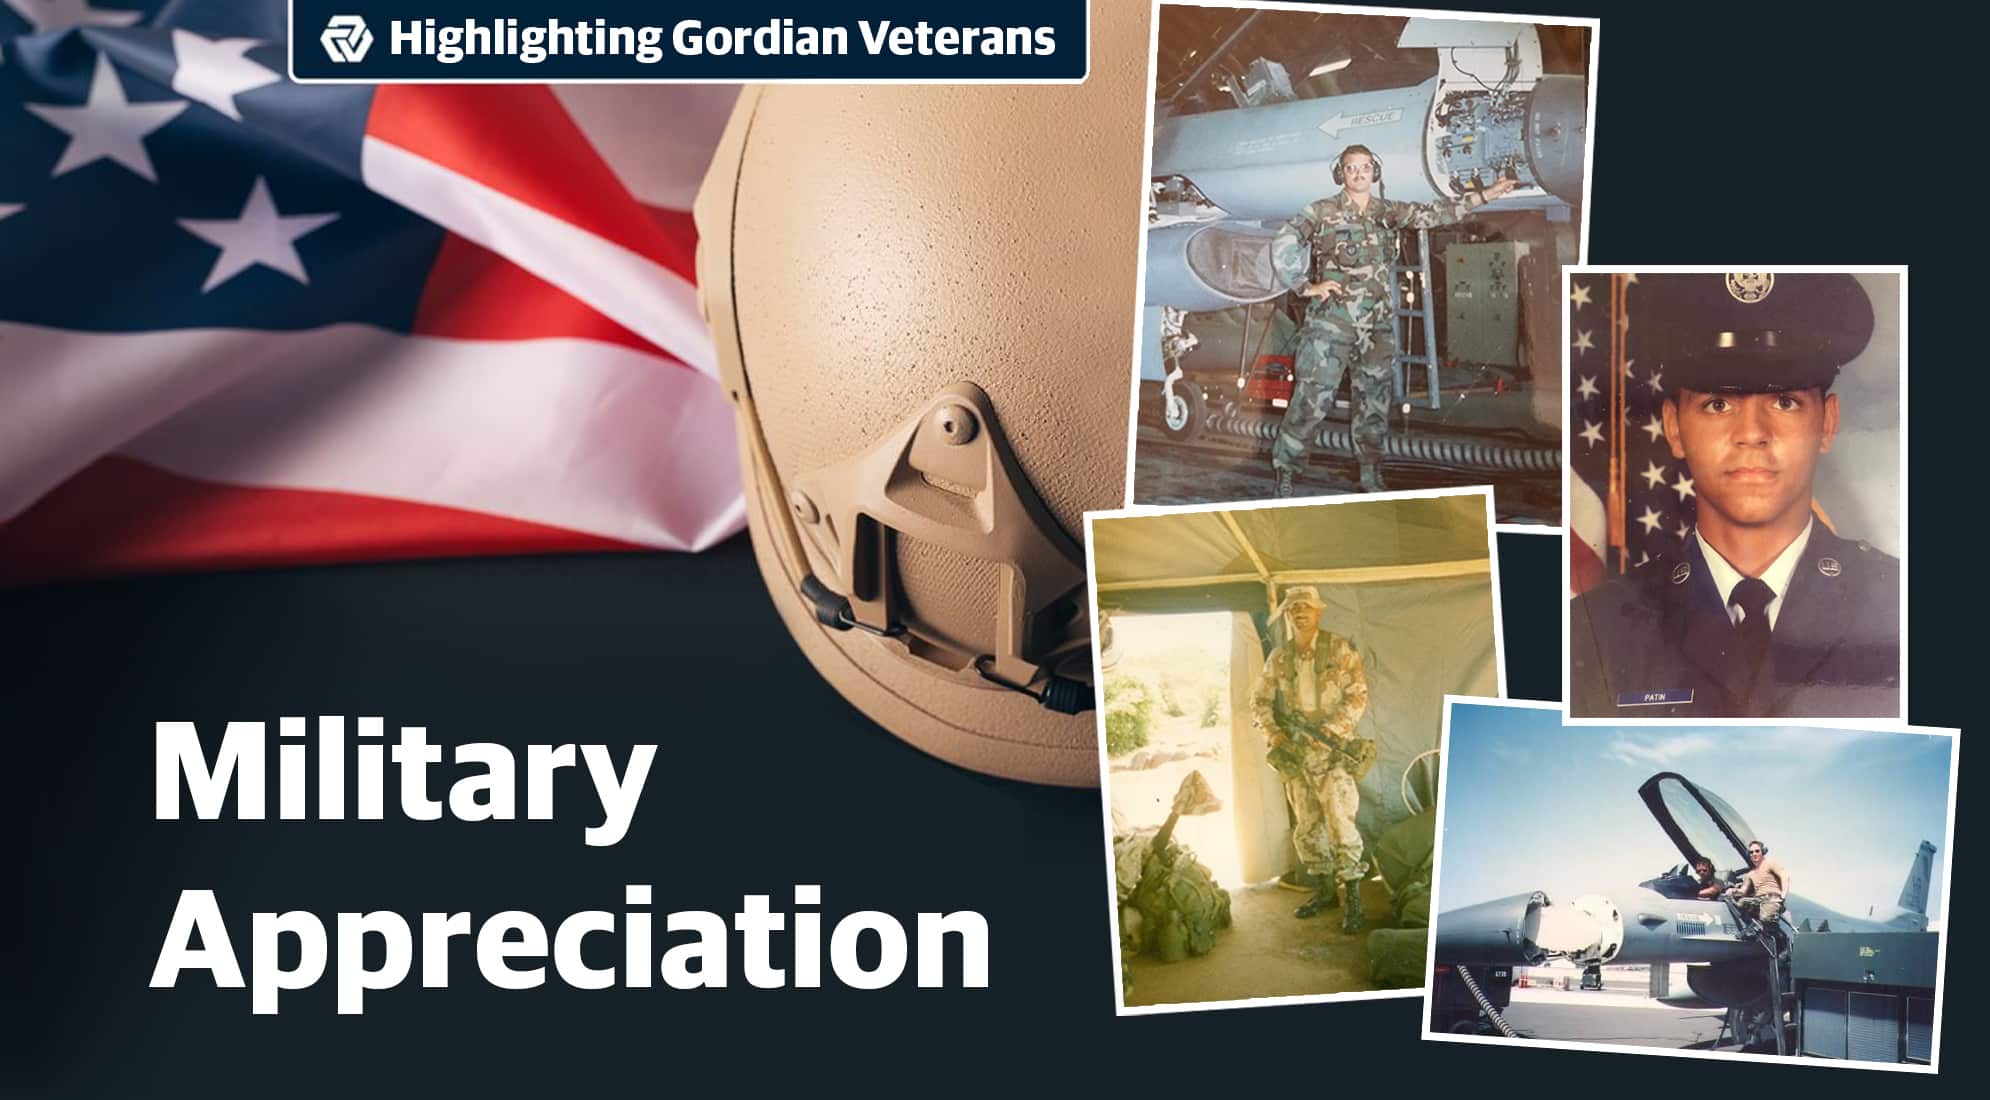 Military Appreciation at Gordian: Highlighting Our Veterans